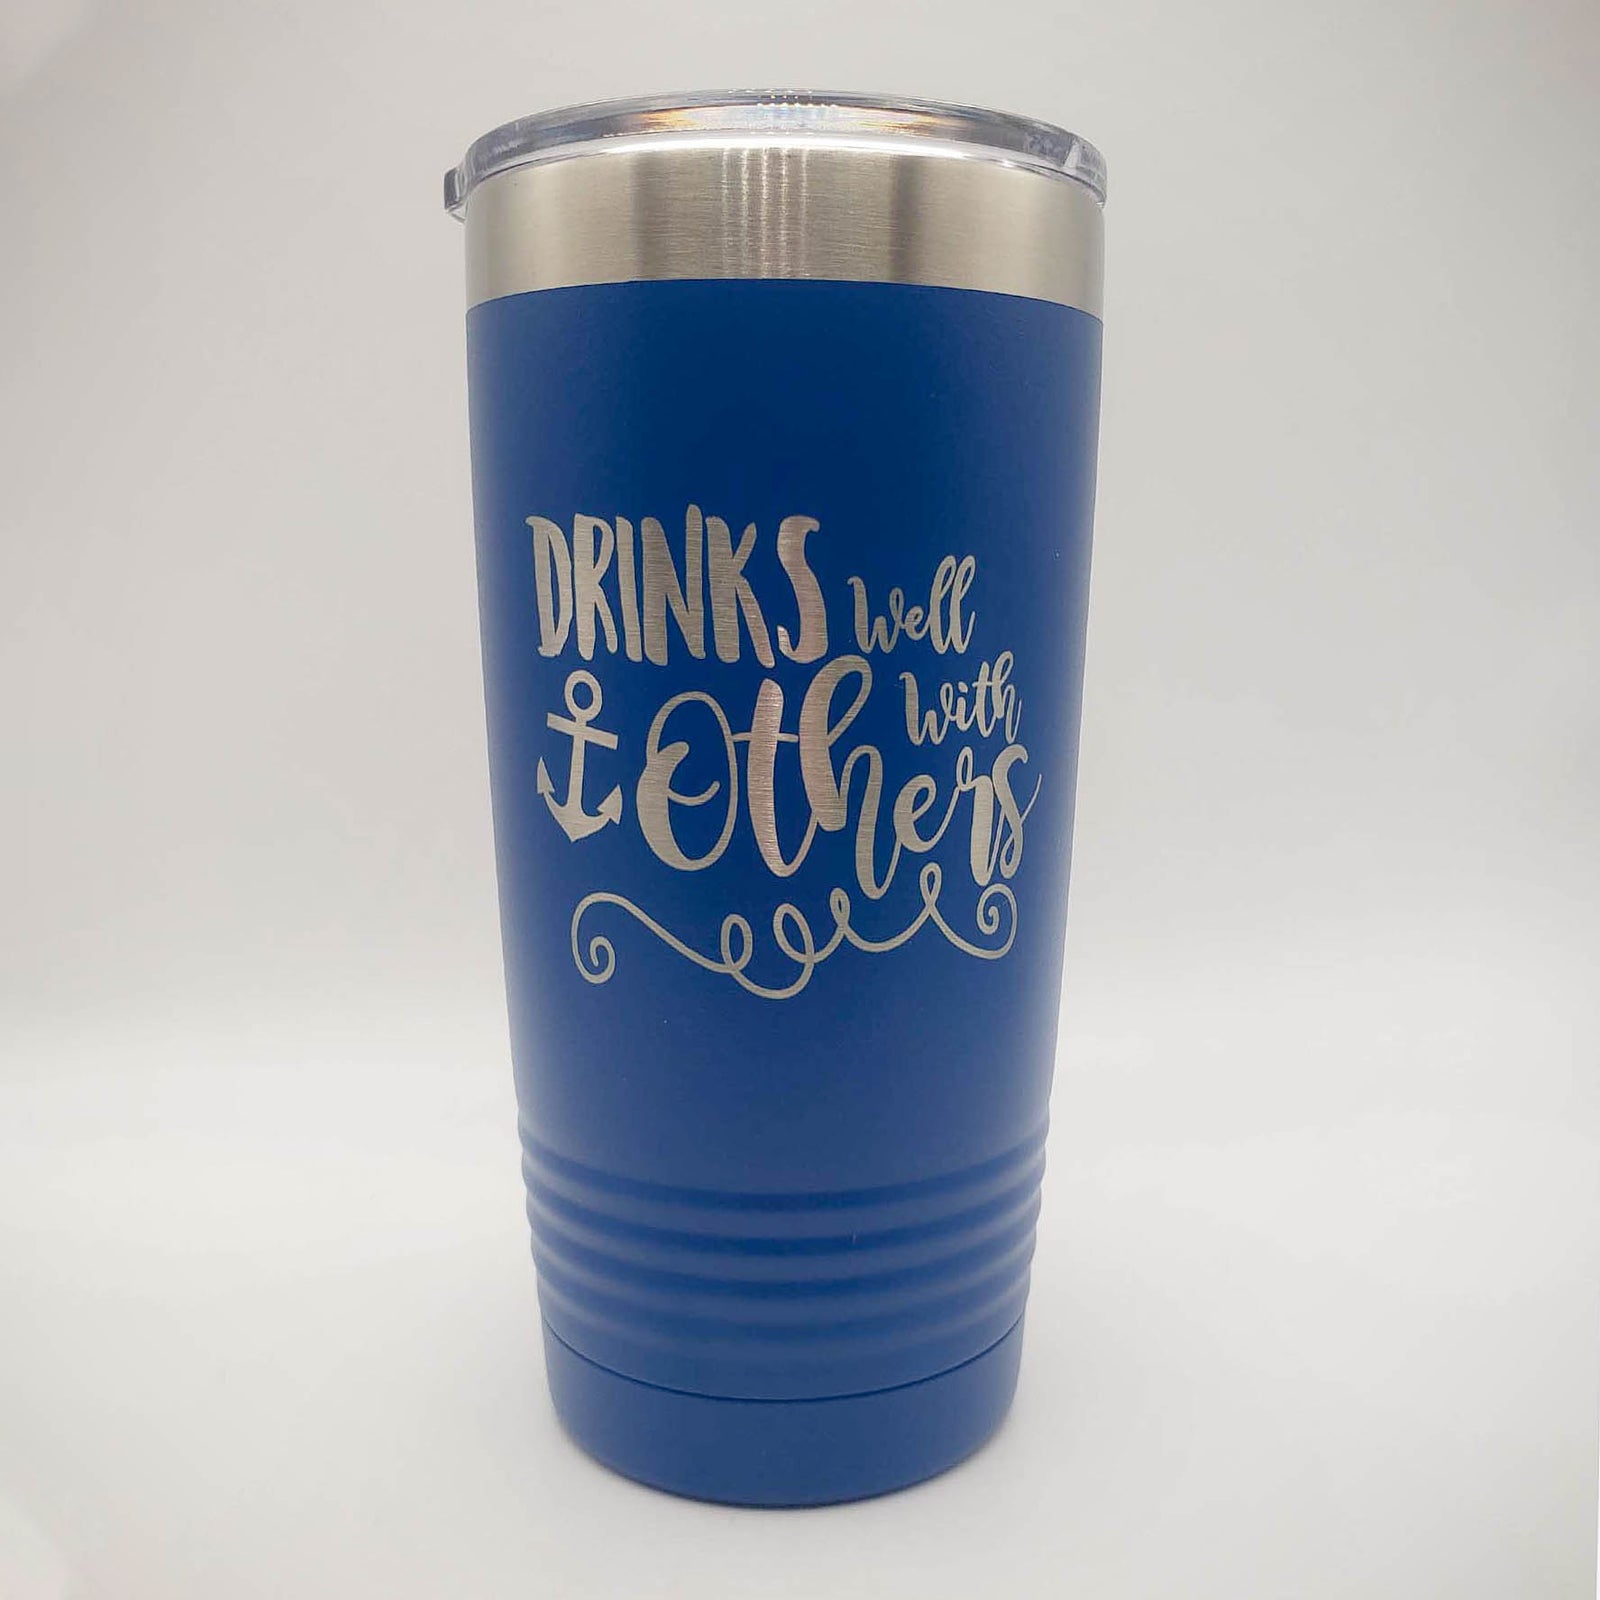 Buy Personalized Best Man Tumbler, Camel Tumbler with Optional